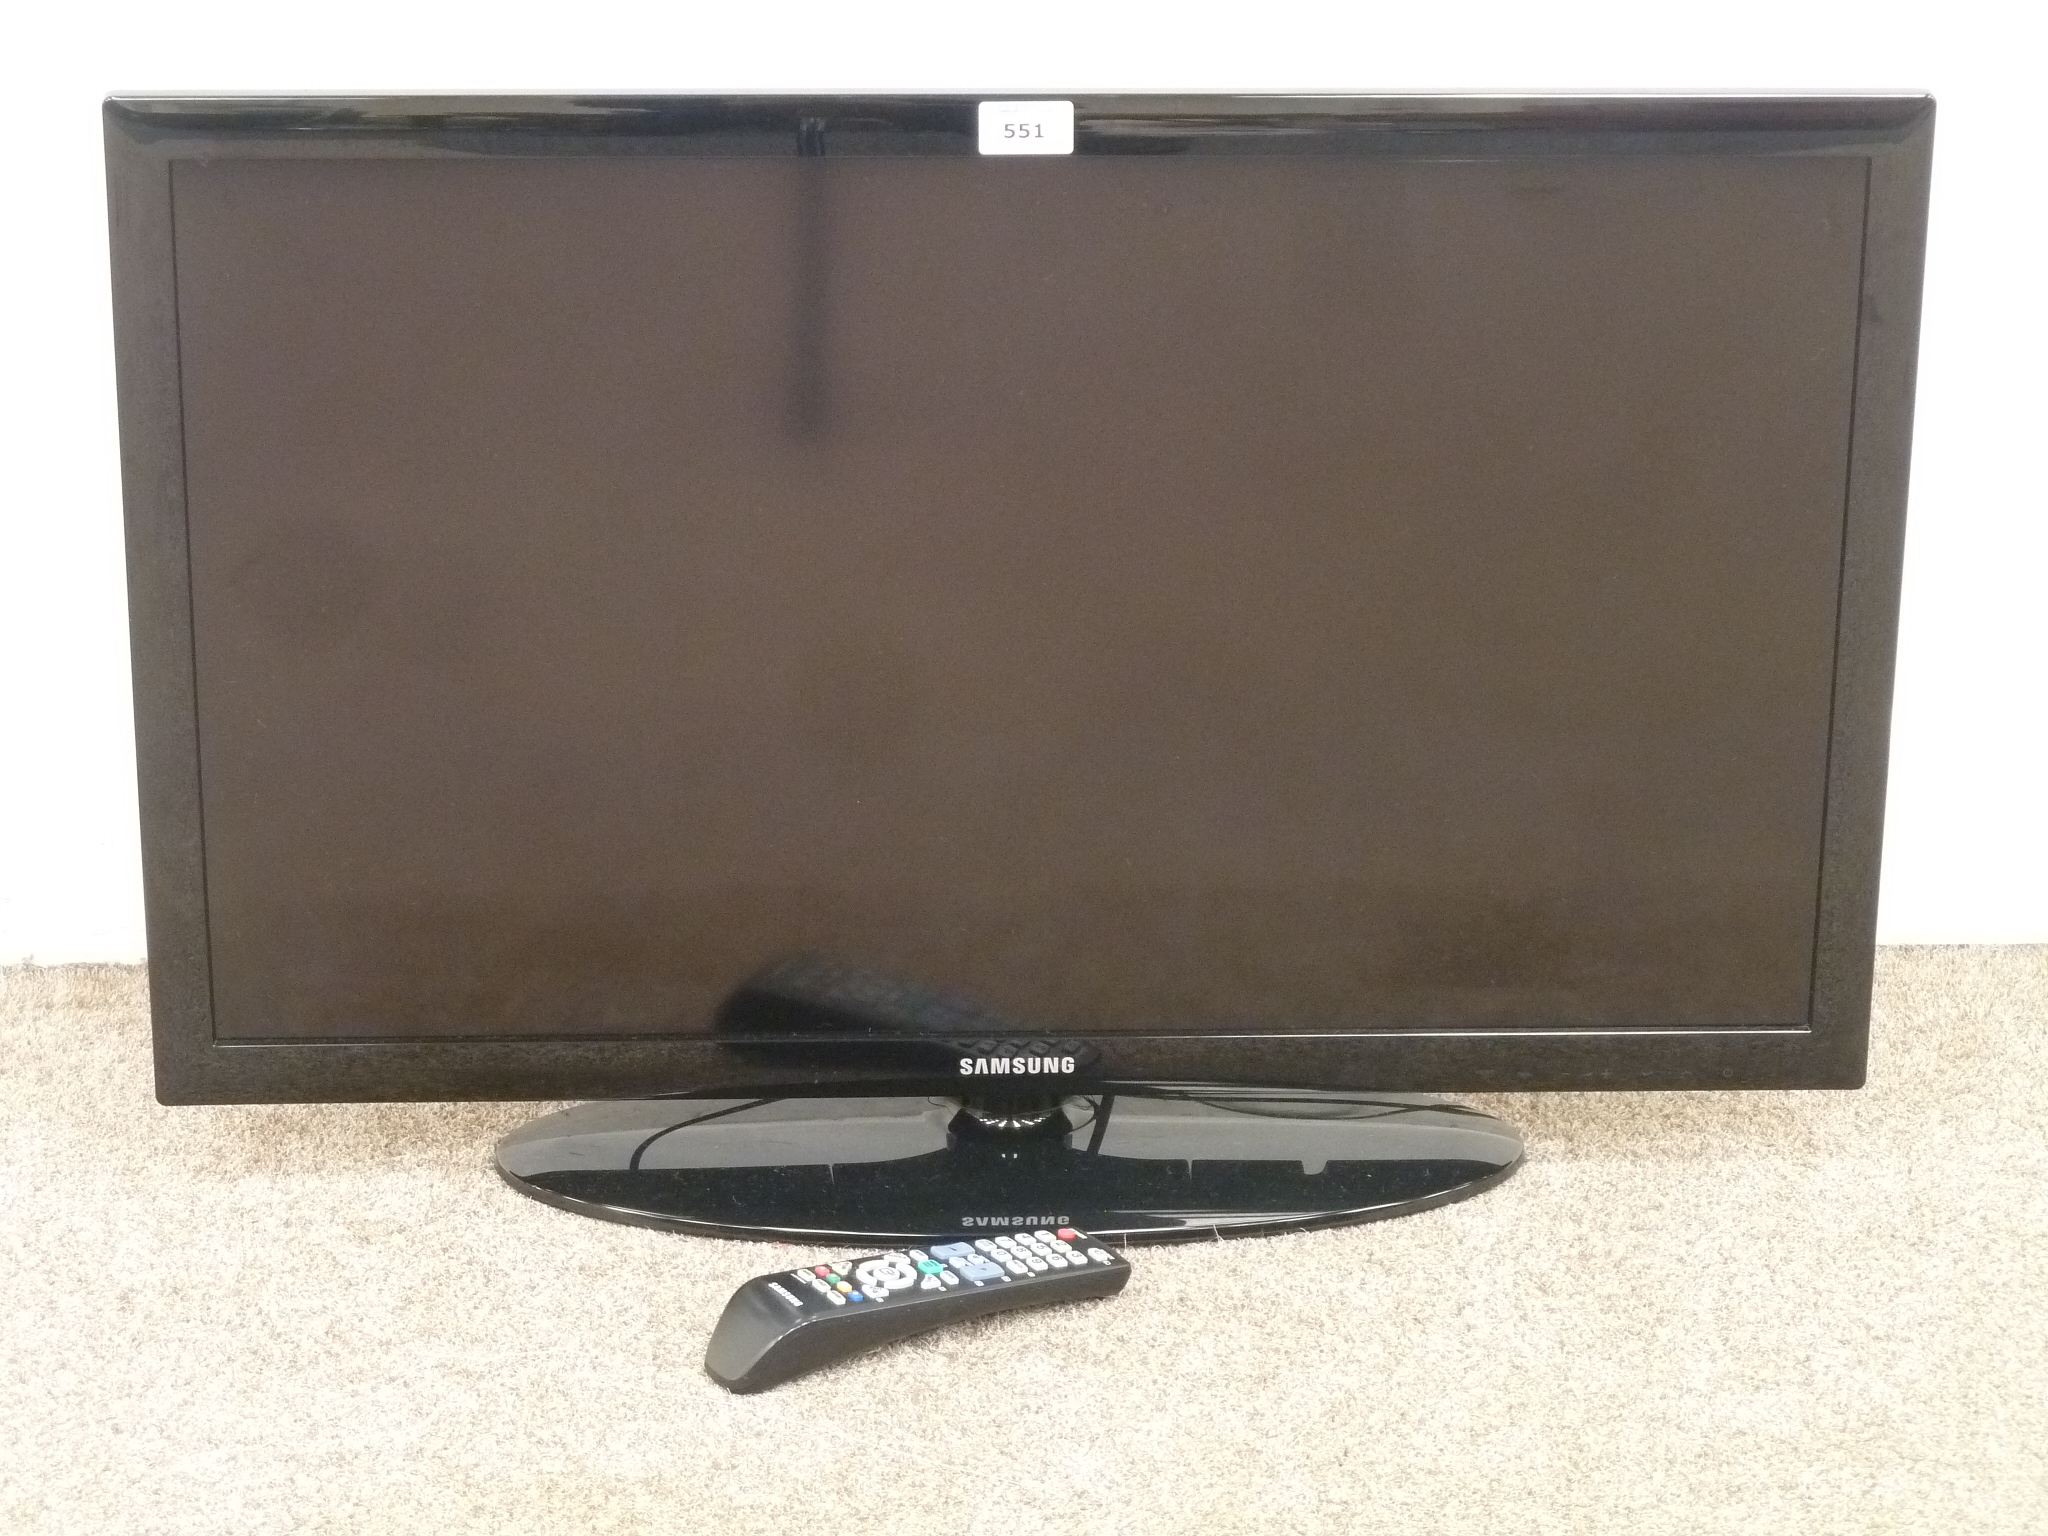 Samsung UE32D4003BW 32'' LED television with remote